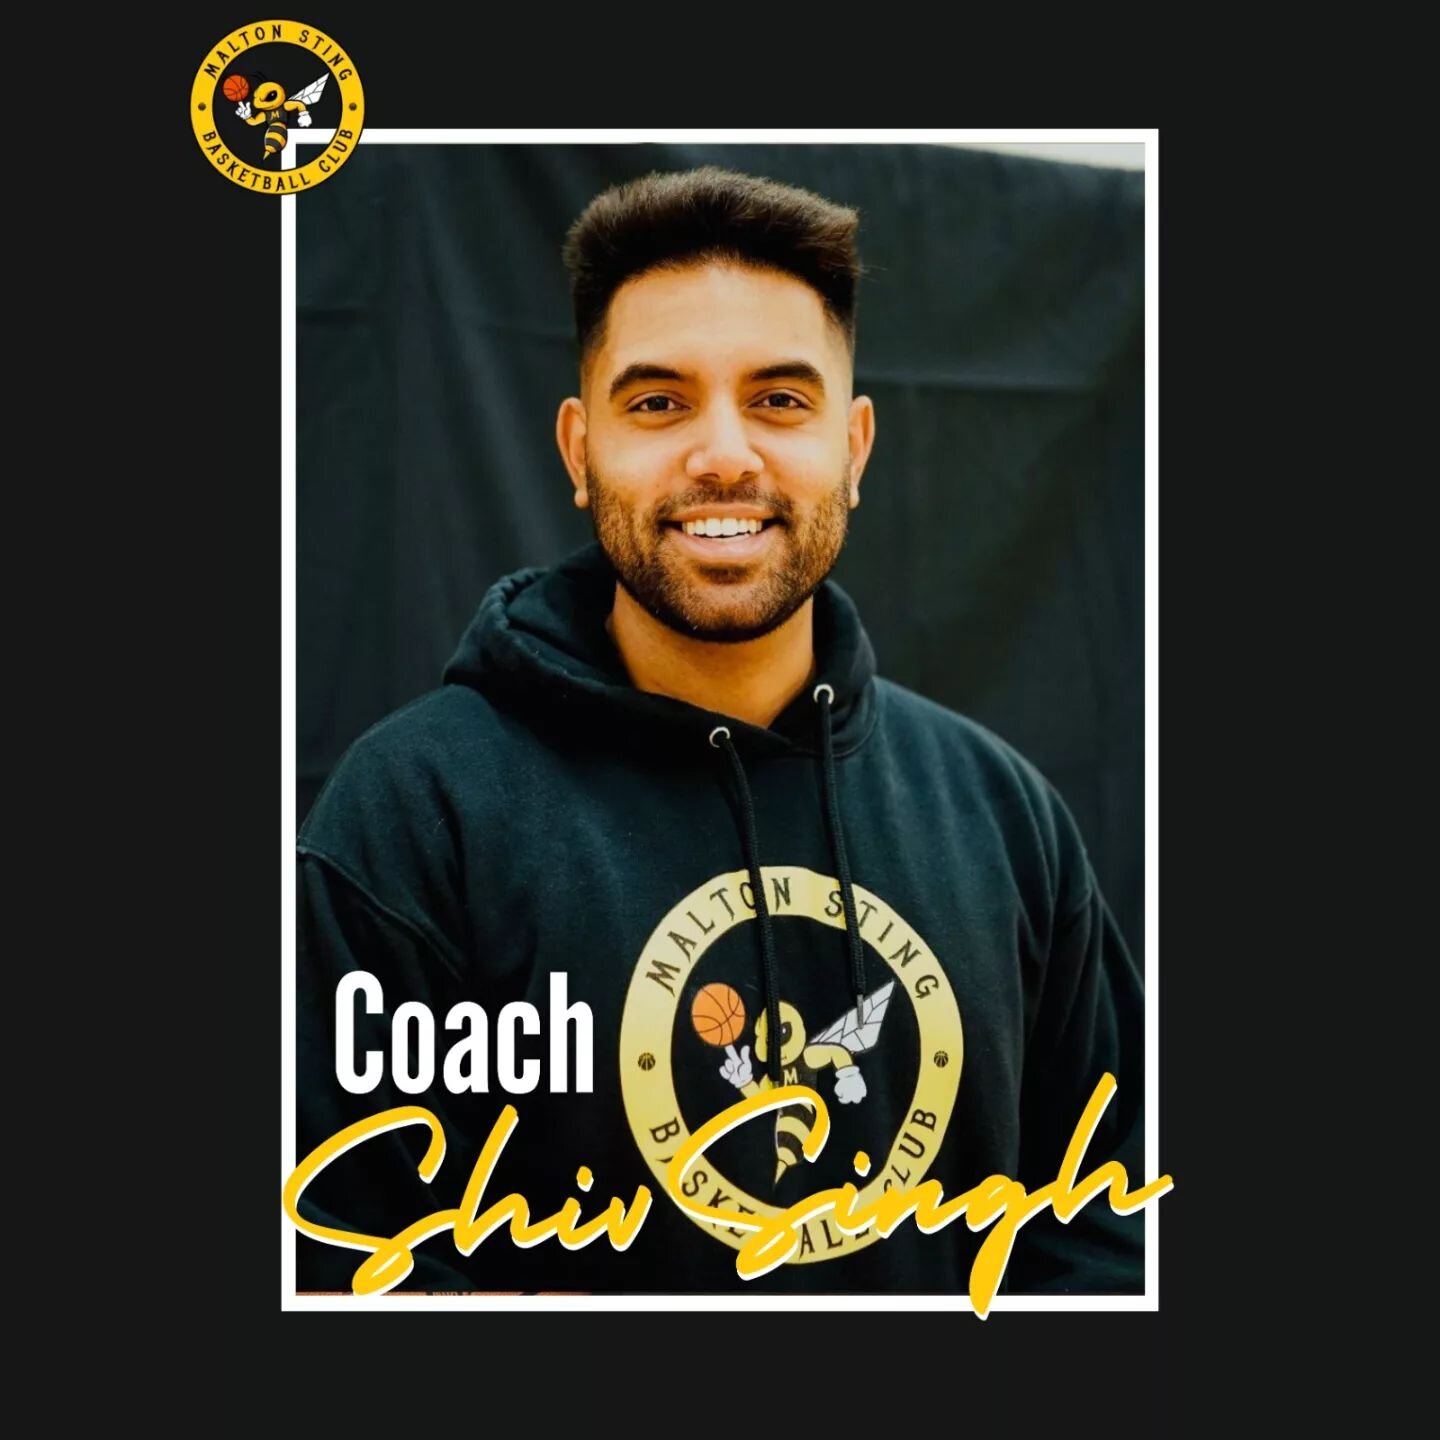 SEASON FIVE - CO-FOUNDER PROFILE

🐝Coach Shiv has been coaching and advocating for exercise as medicine since 2016. His passion for exercise and sport as a vehicle for change led him to Co-found the Malton Sting Basketball Club in 2019. Coach Shiv i